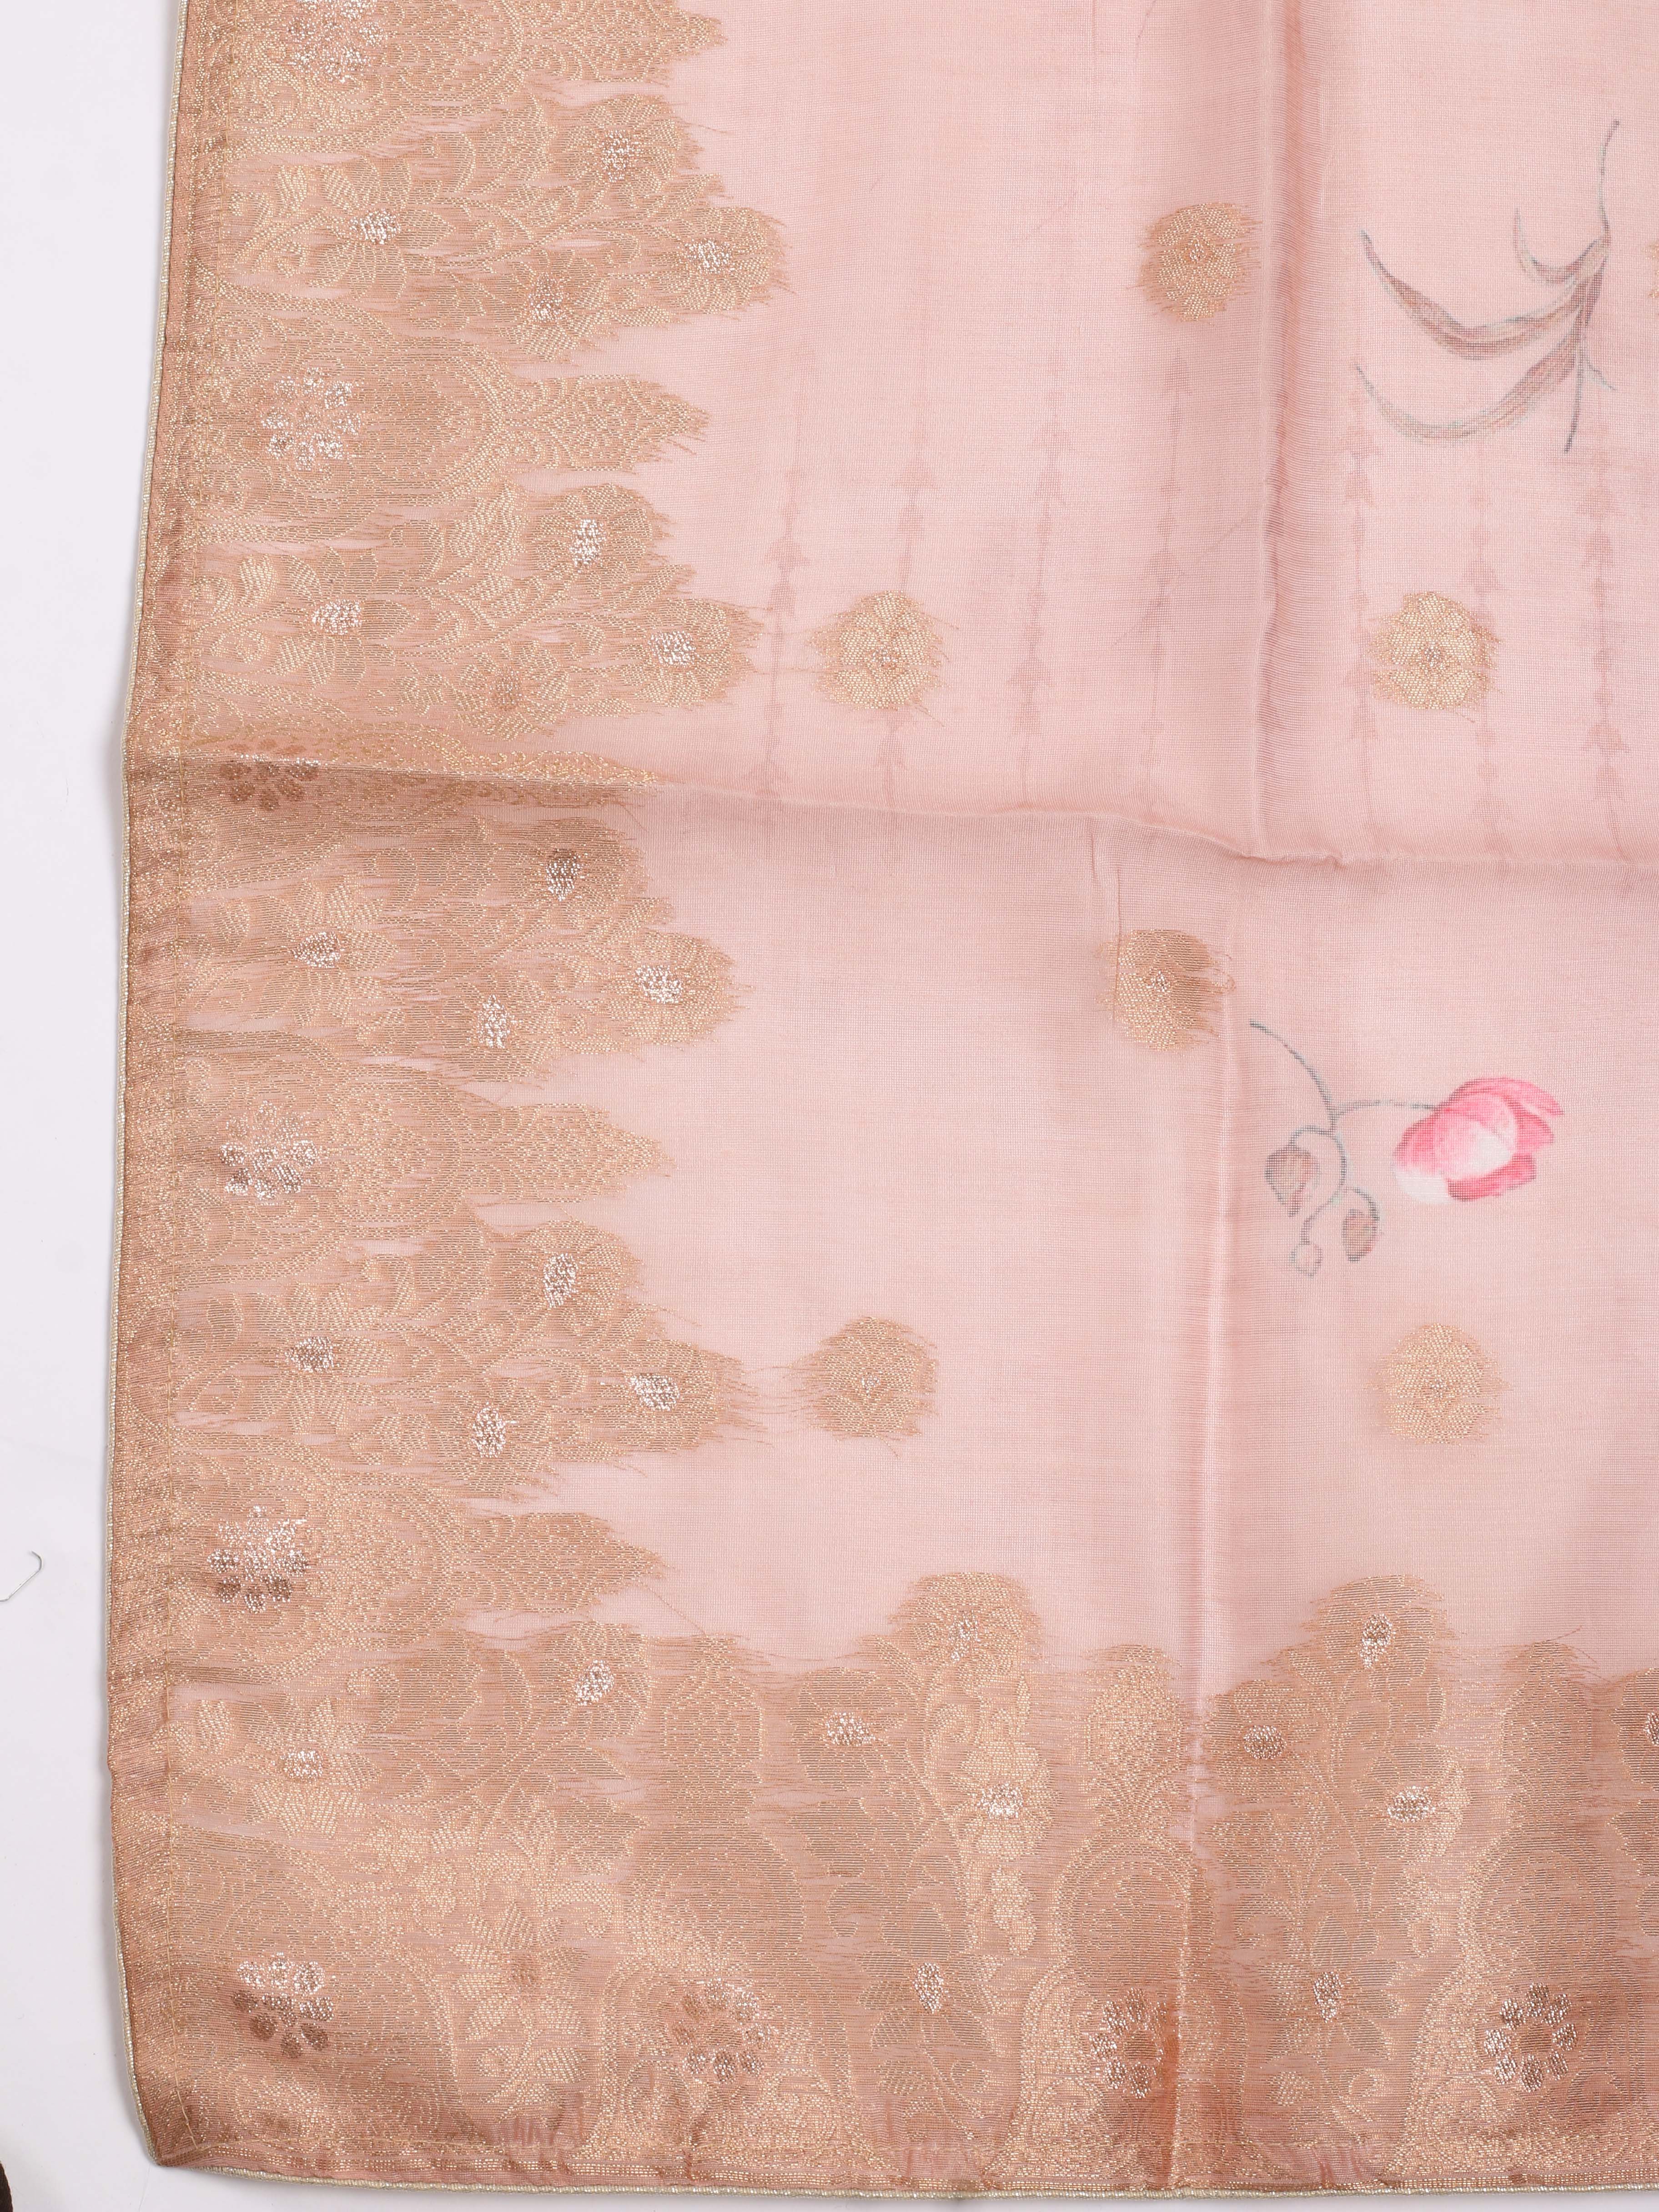 Neck Embroidered Chanderi Unstitched Suit Piece With Dupatta